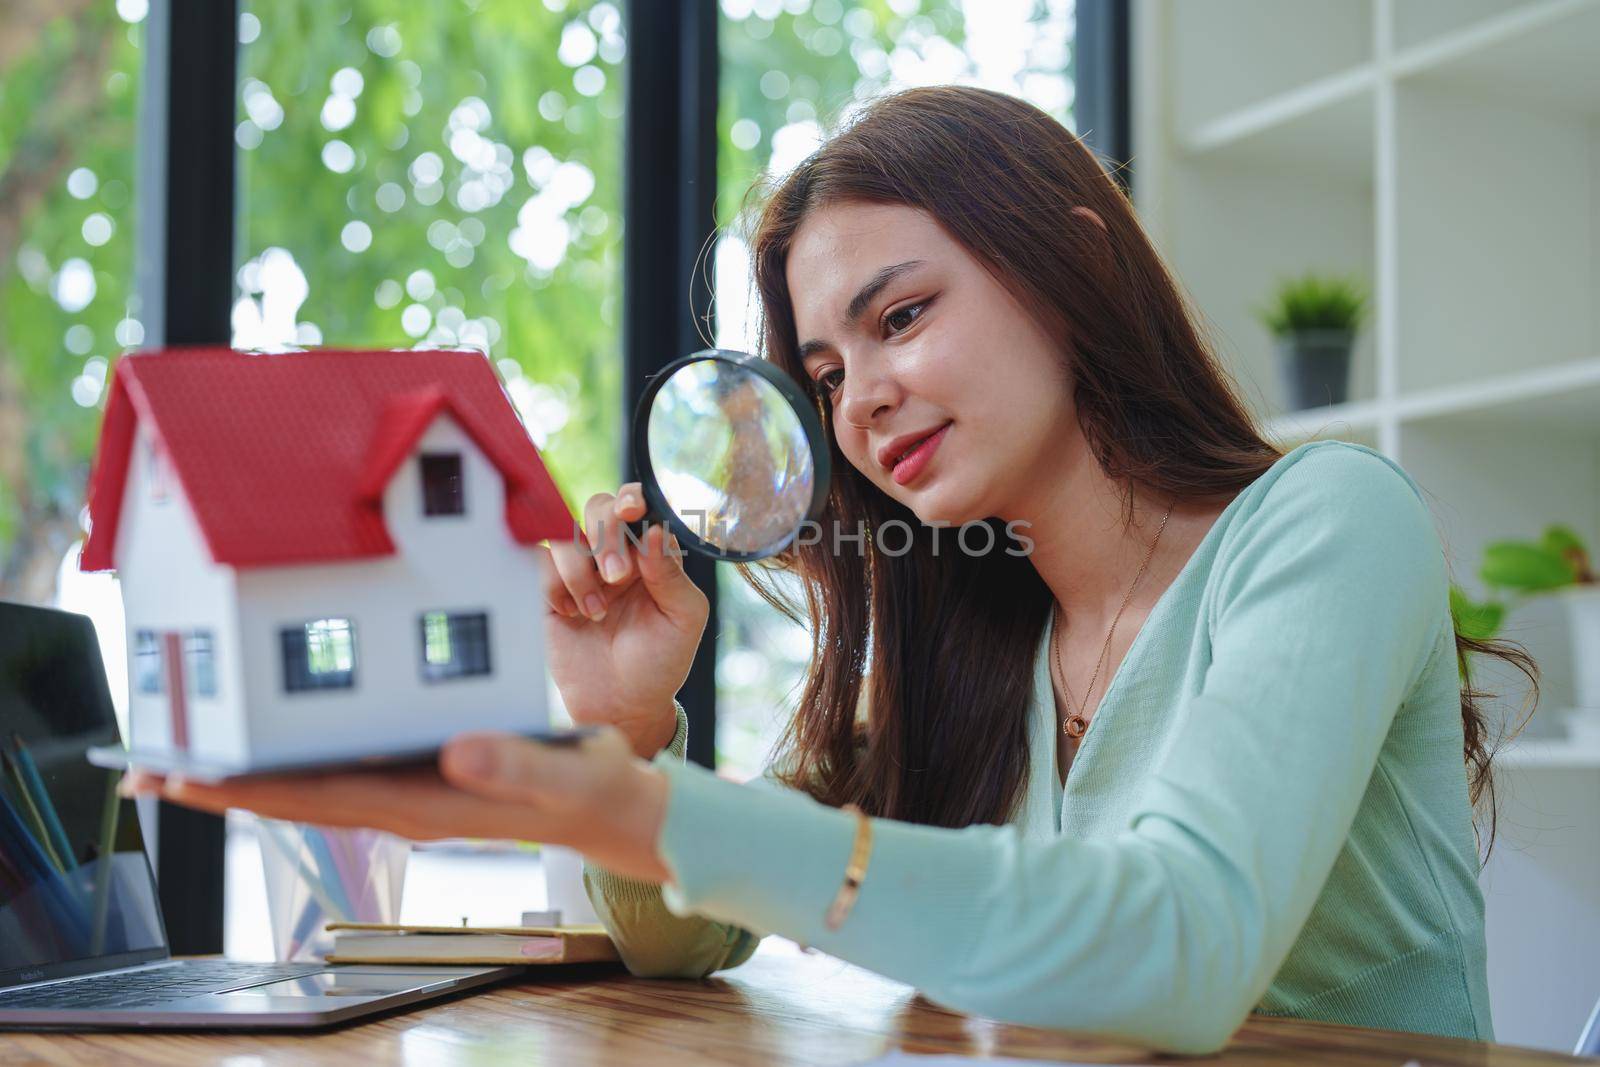 customer holding a magnifying glass to look at a house model inspection by Manastrong